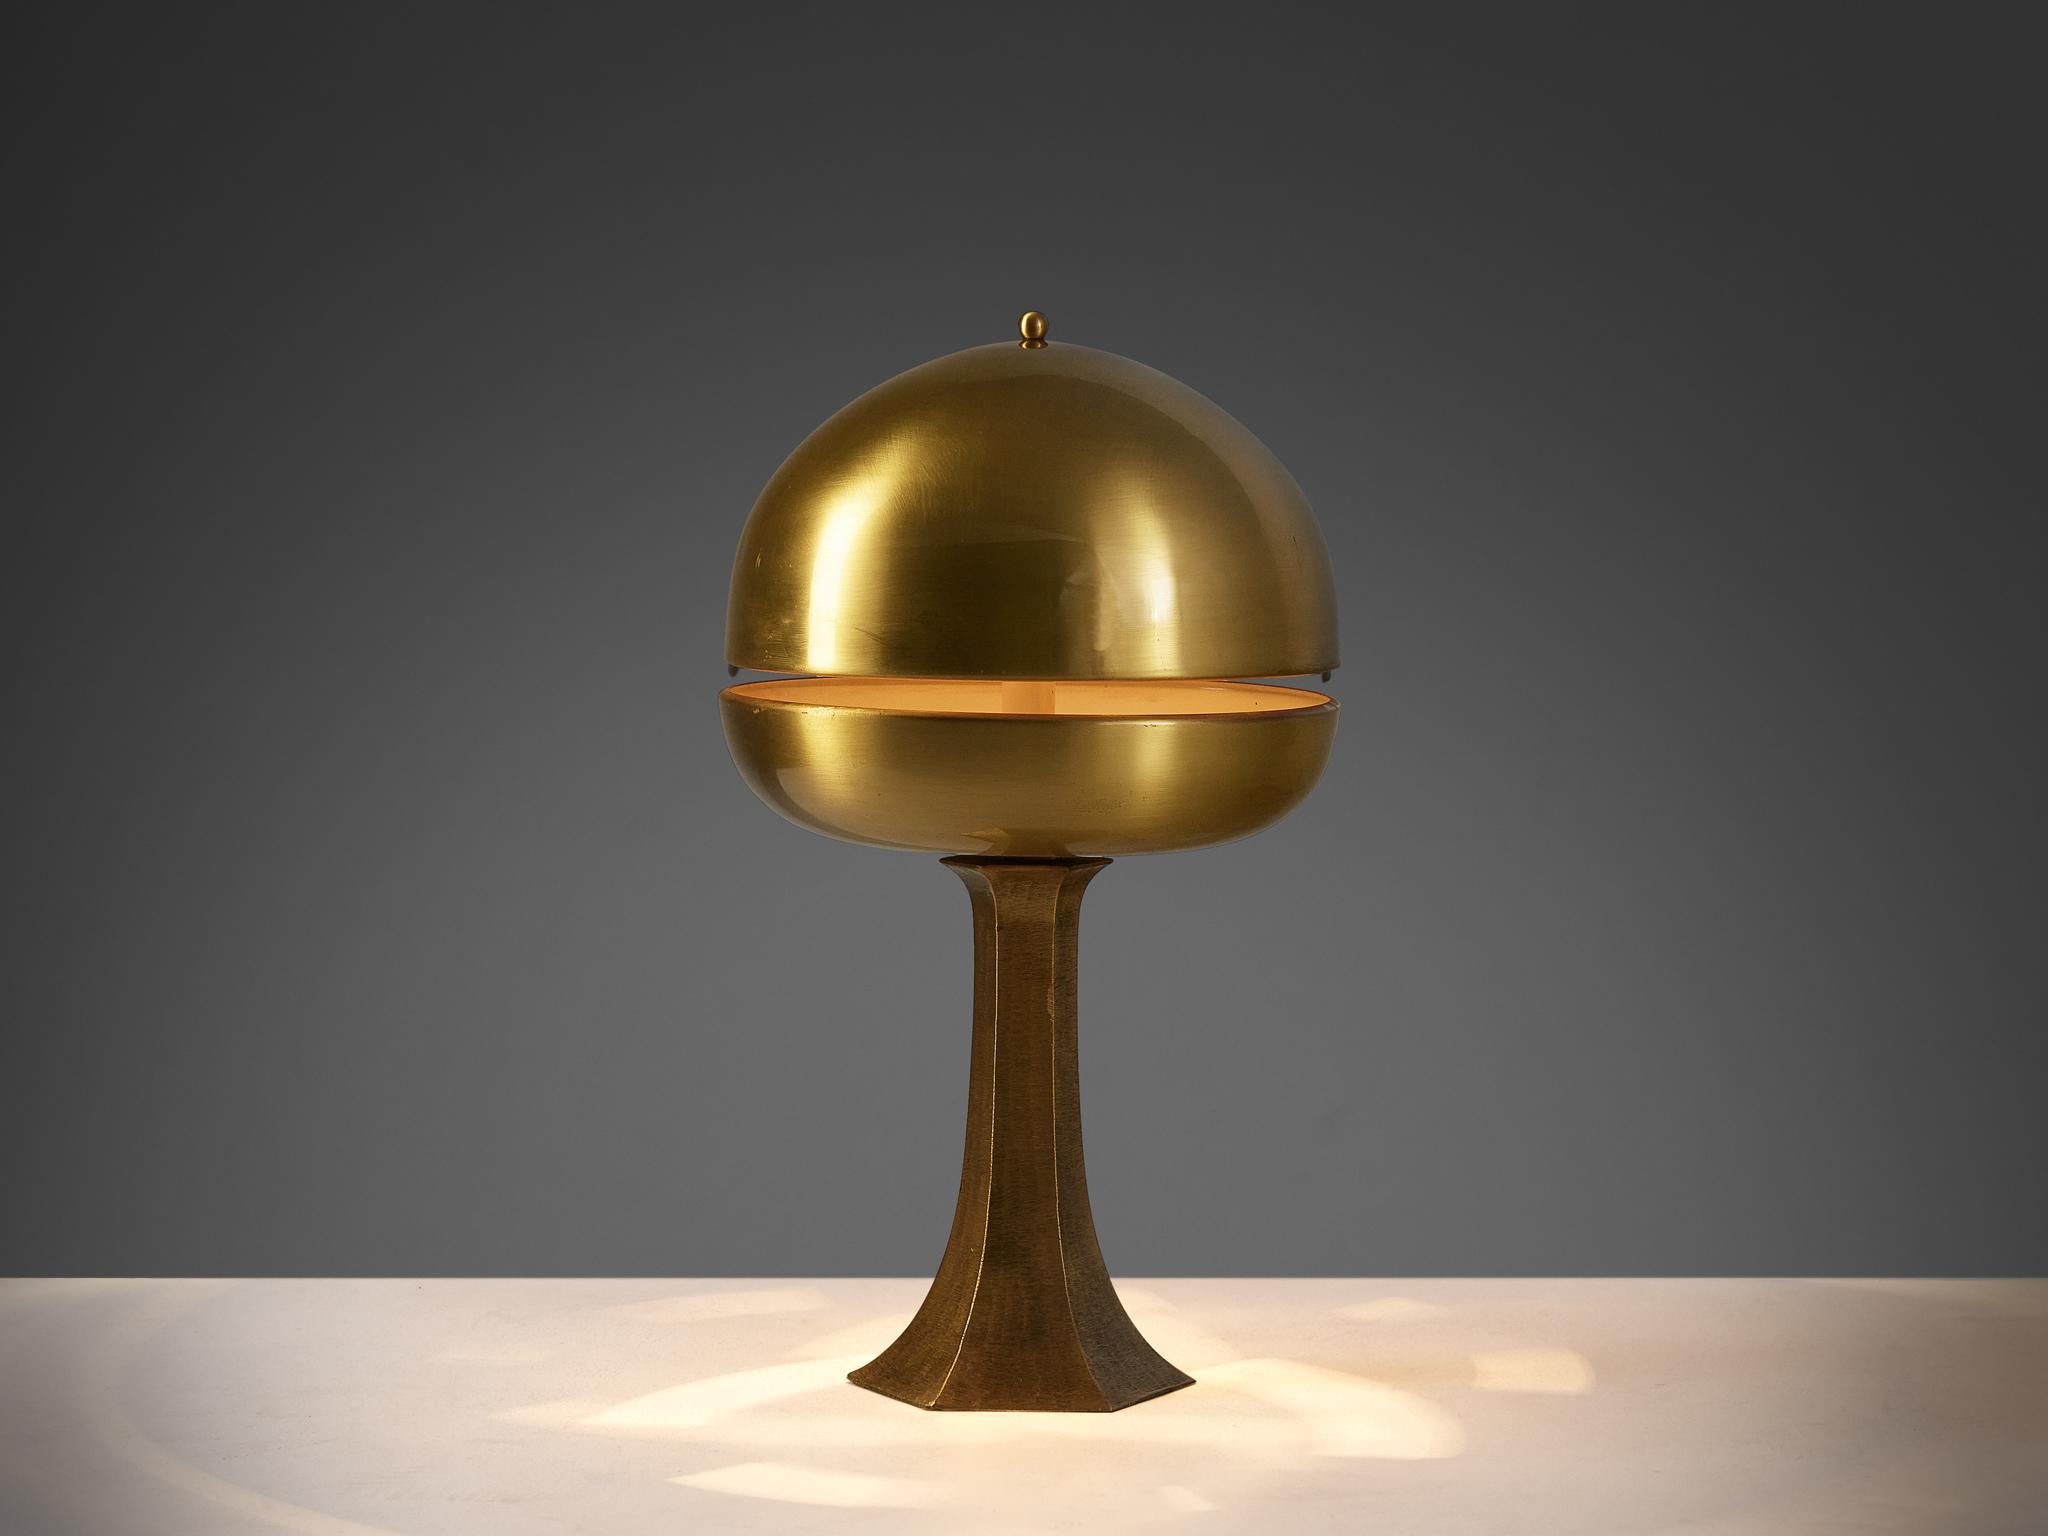 Luciano Frigerio for Frigerio di Desio 'Rapsodia' table lamp, brass, Italy, 1970s

Indulge in the timeless allure of the 'Rapsodia' table lamp, a masterpiece by Luciano Frigerio, meticulously crafted during the vibrant 1970s era. Fashioned from